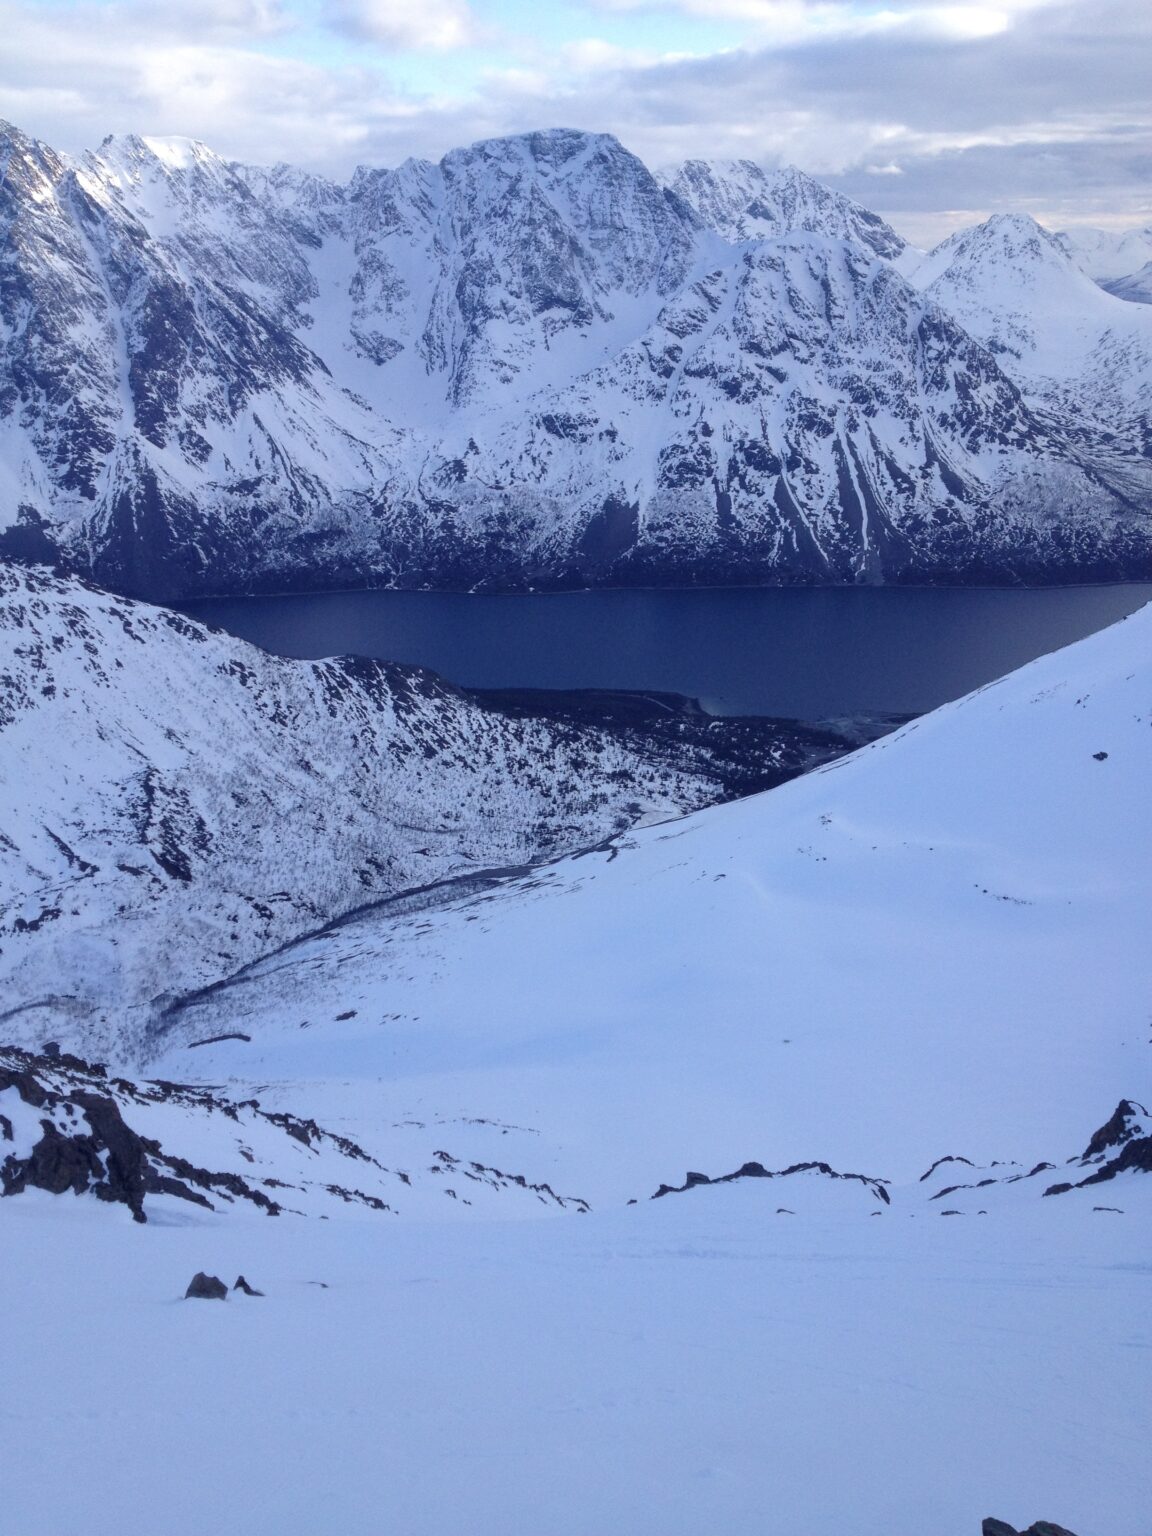 Looking down the South slope of Tverelvdalstindan in the Lyngen Alps of Norway